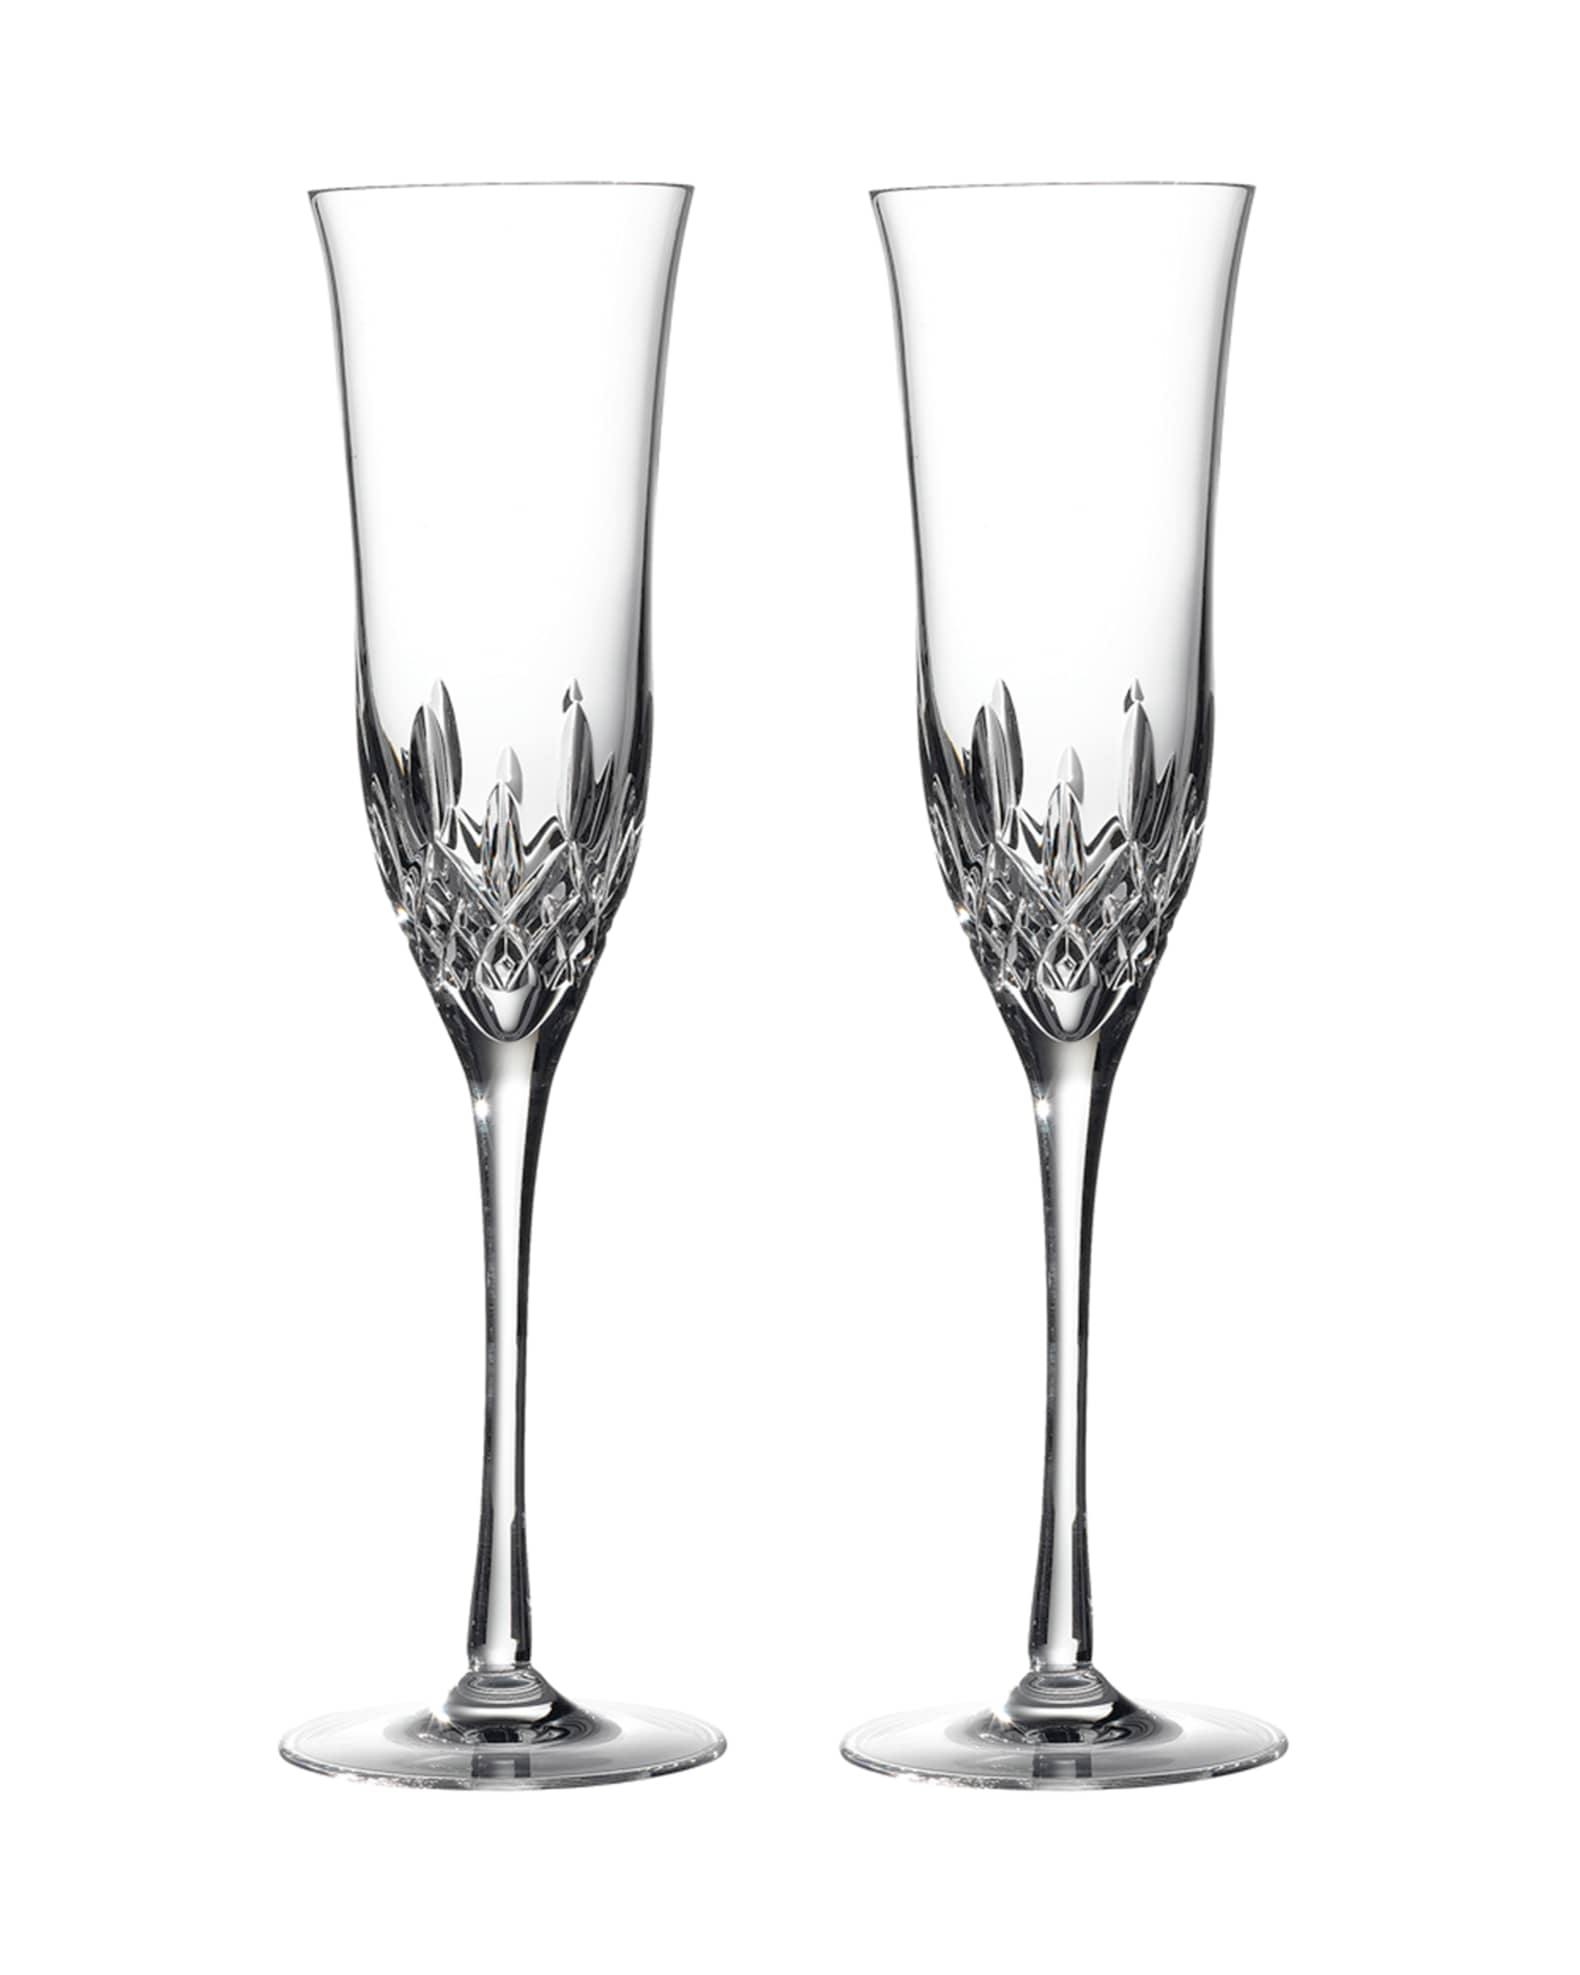 SET OF 10 WATERFORD CRYSTAL LISMORE BRANDY SNIFTERS / GLASSES